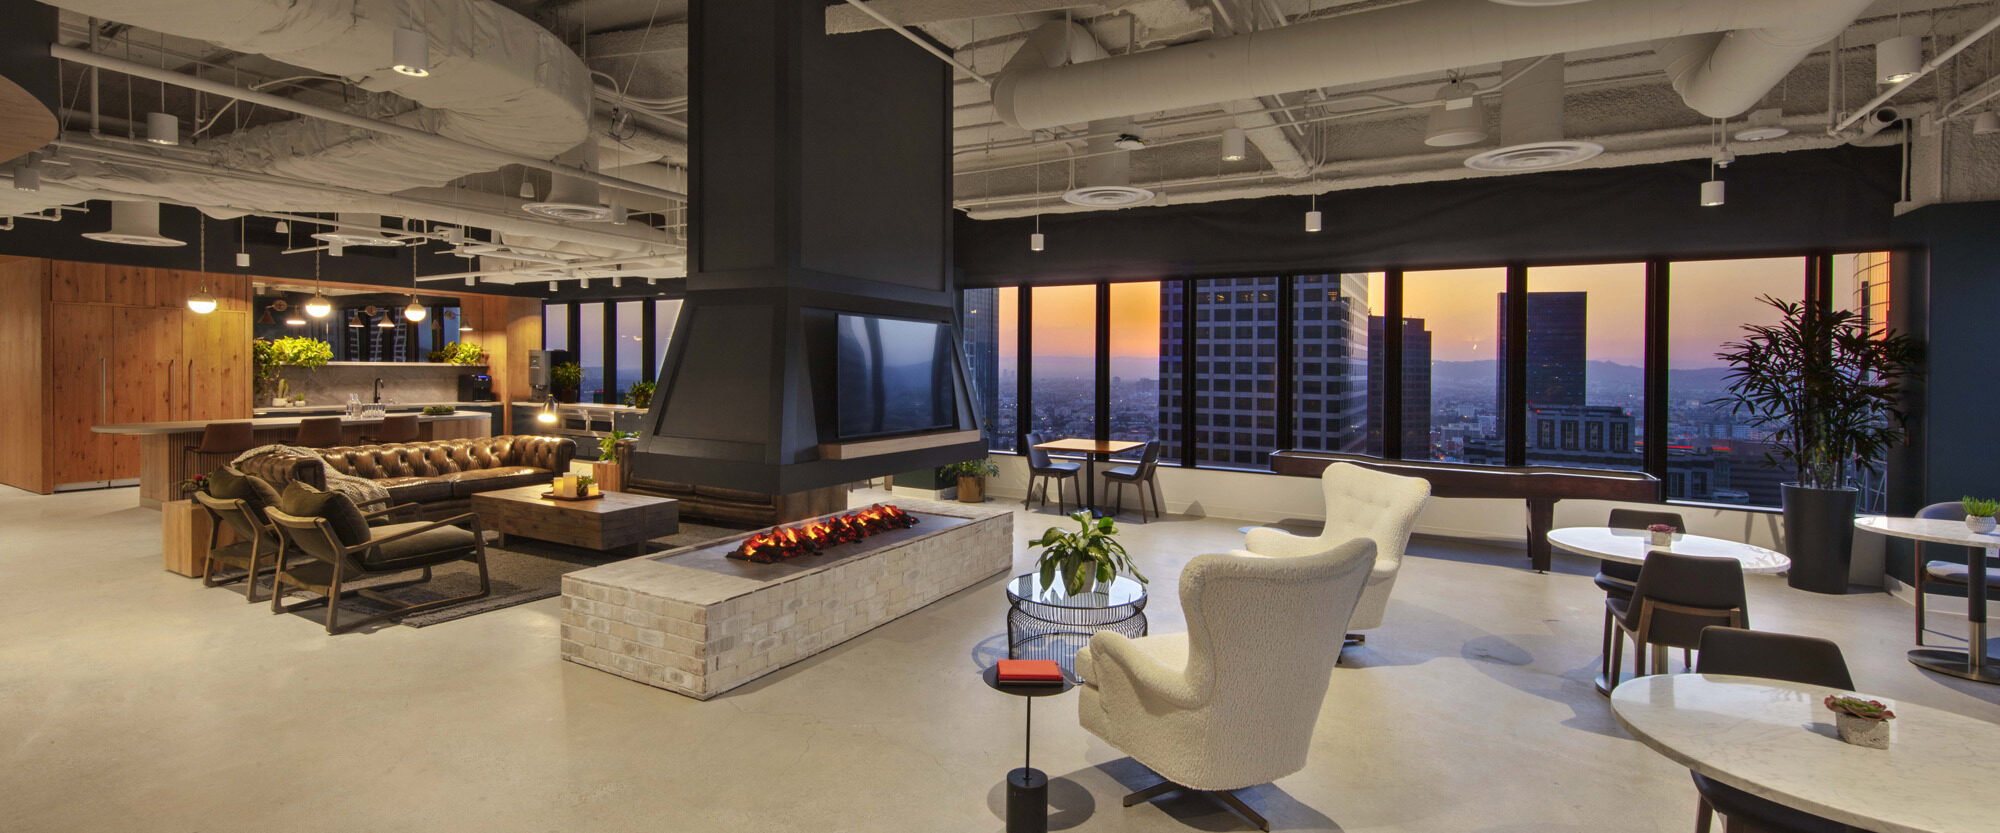 Open-plan office lounge featuring eclectic furnishings, with a warm fireplace, exposed piping on the ceiling, and floor-to-ceiling windows showcasing a cityscape during twilight.